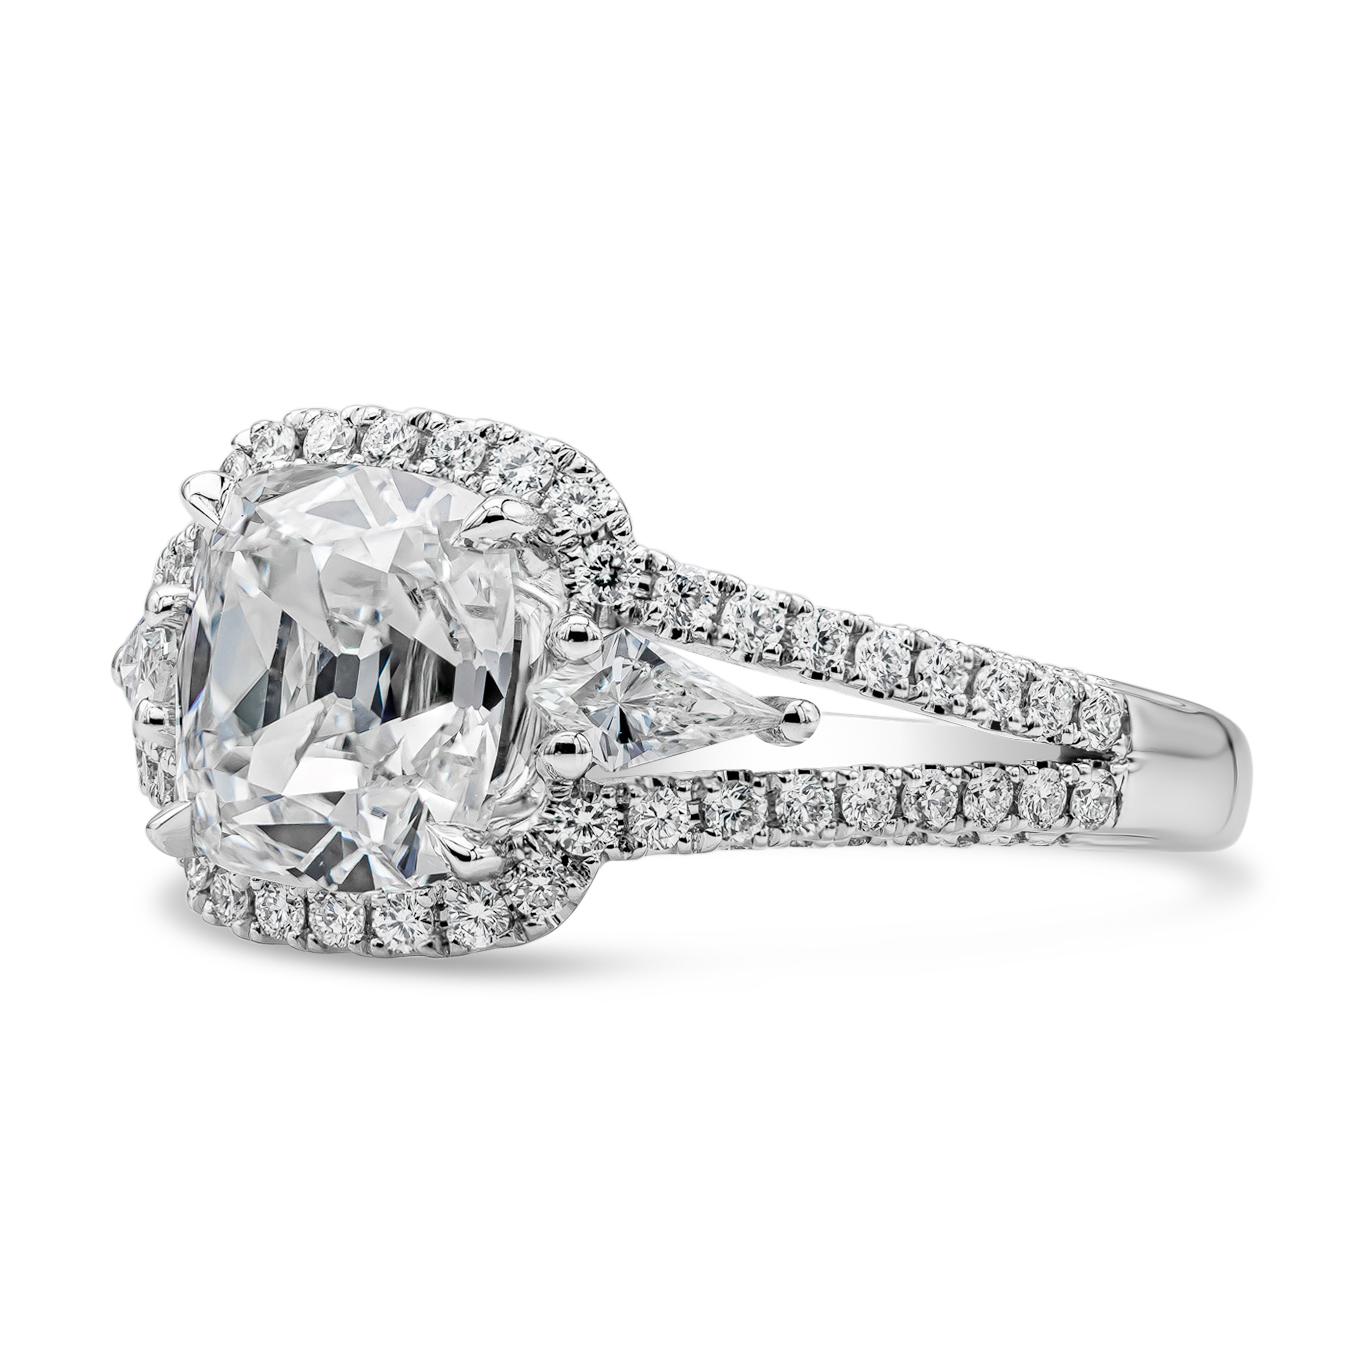 This elegant three stone halo engagement ring style showcasing a GIA certified 2.22 carats cushion cut diamond, G color and VS1 in clarity.  Flanked by brilliant kite cut diamonds on each side, set in a diamond encrusted split-shank setting made in